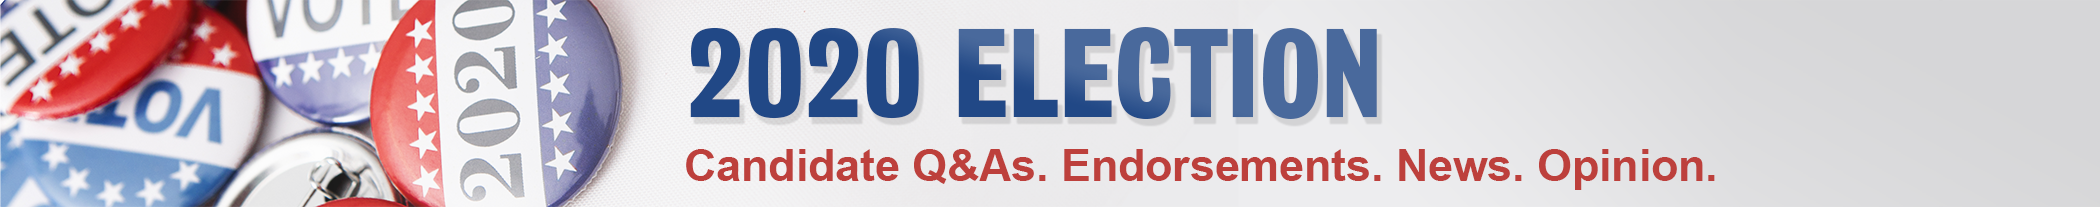 Election news banner links to 2020 Election page with candidate Q&As, endorsements, news and opinion.